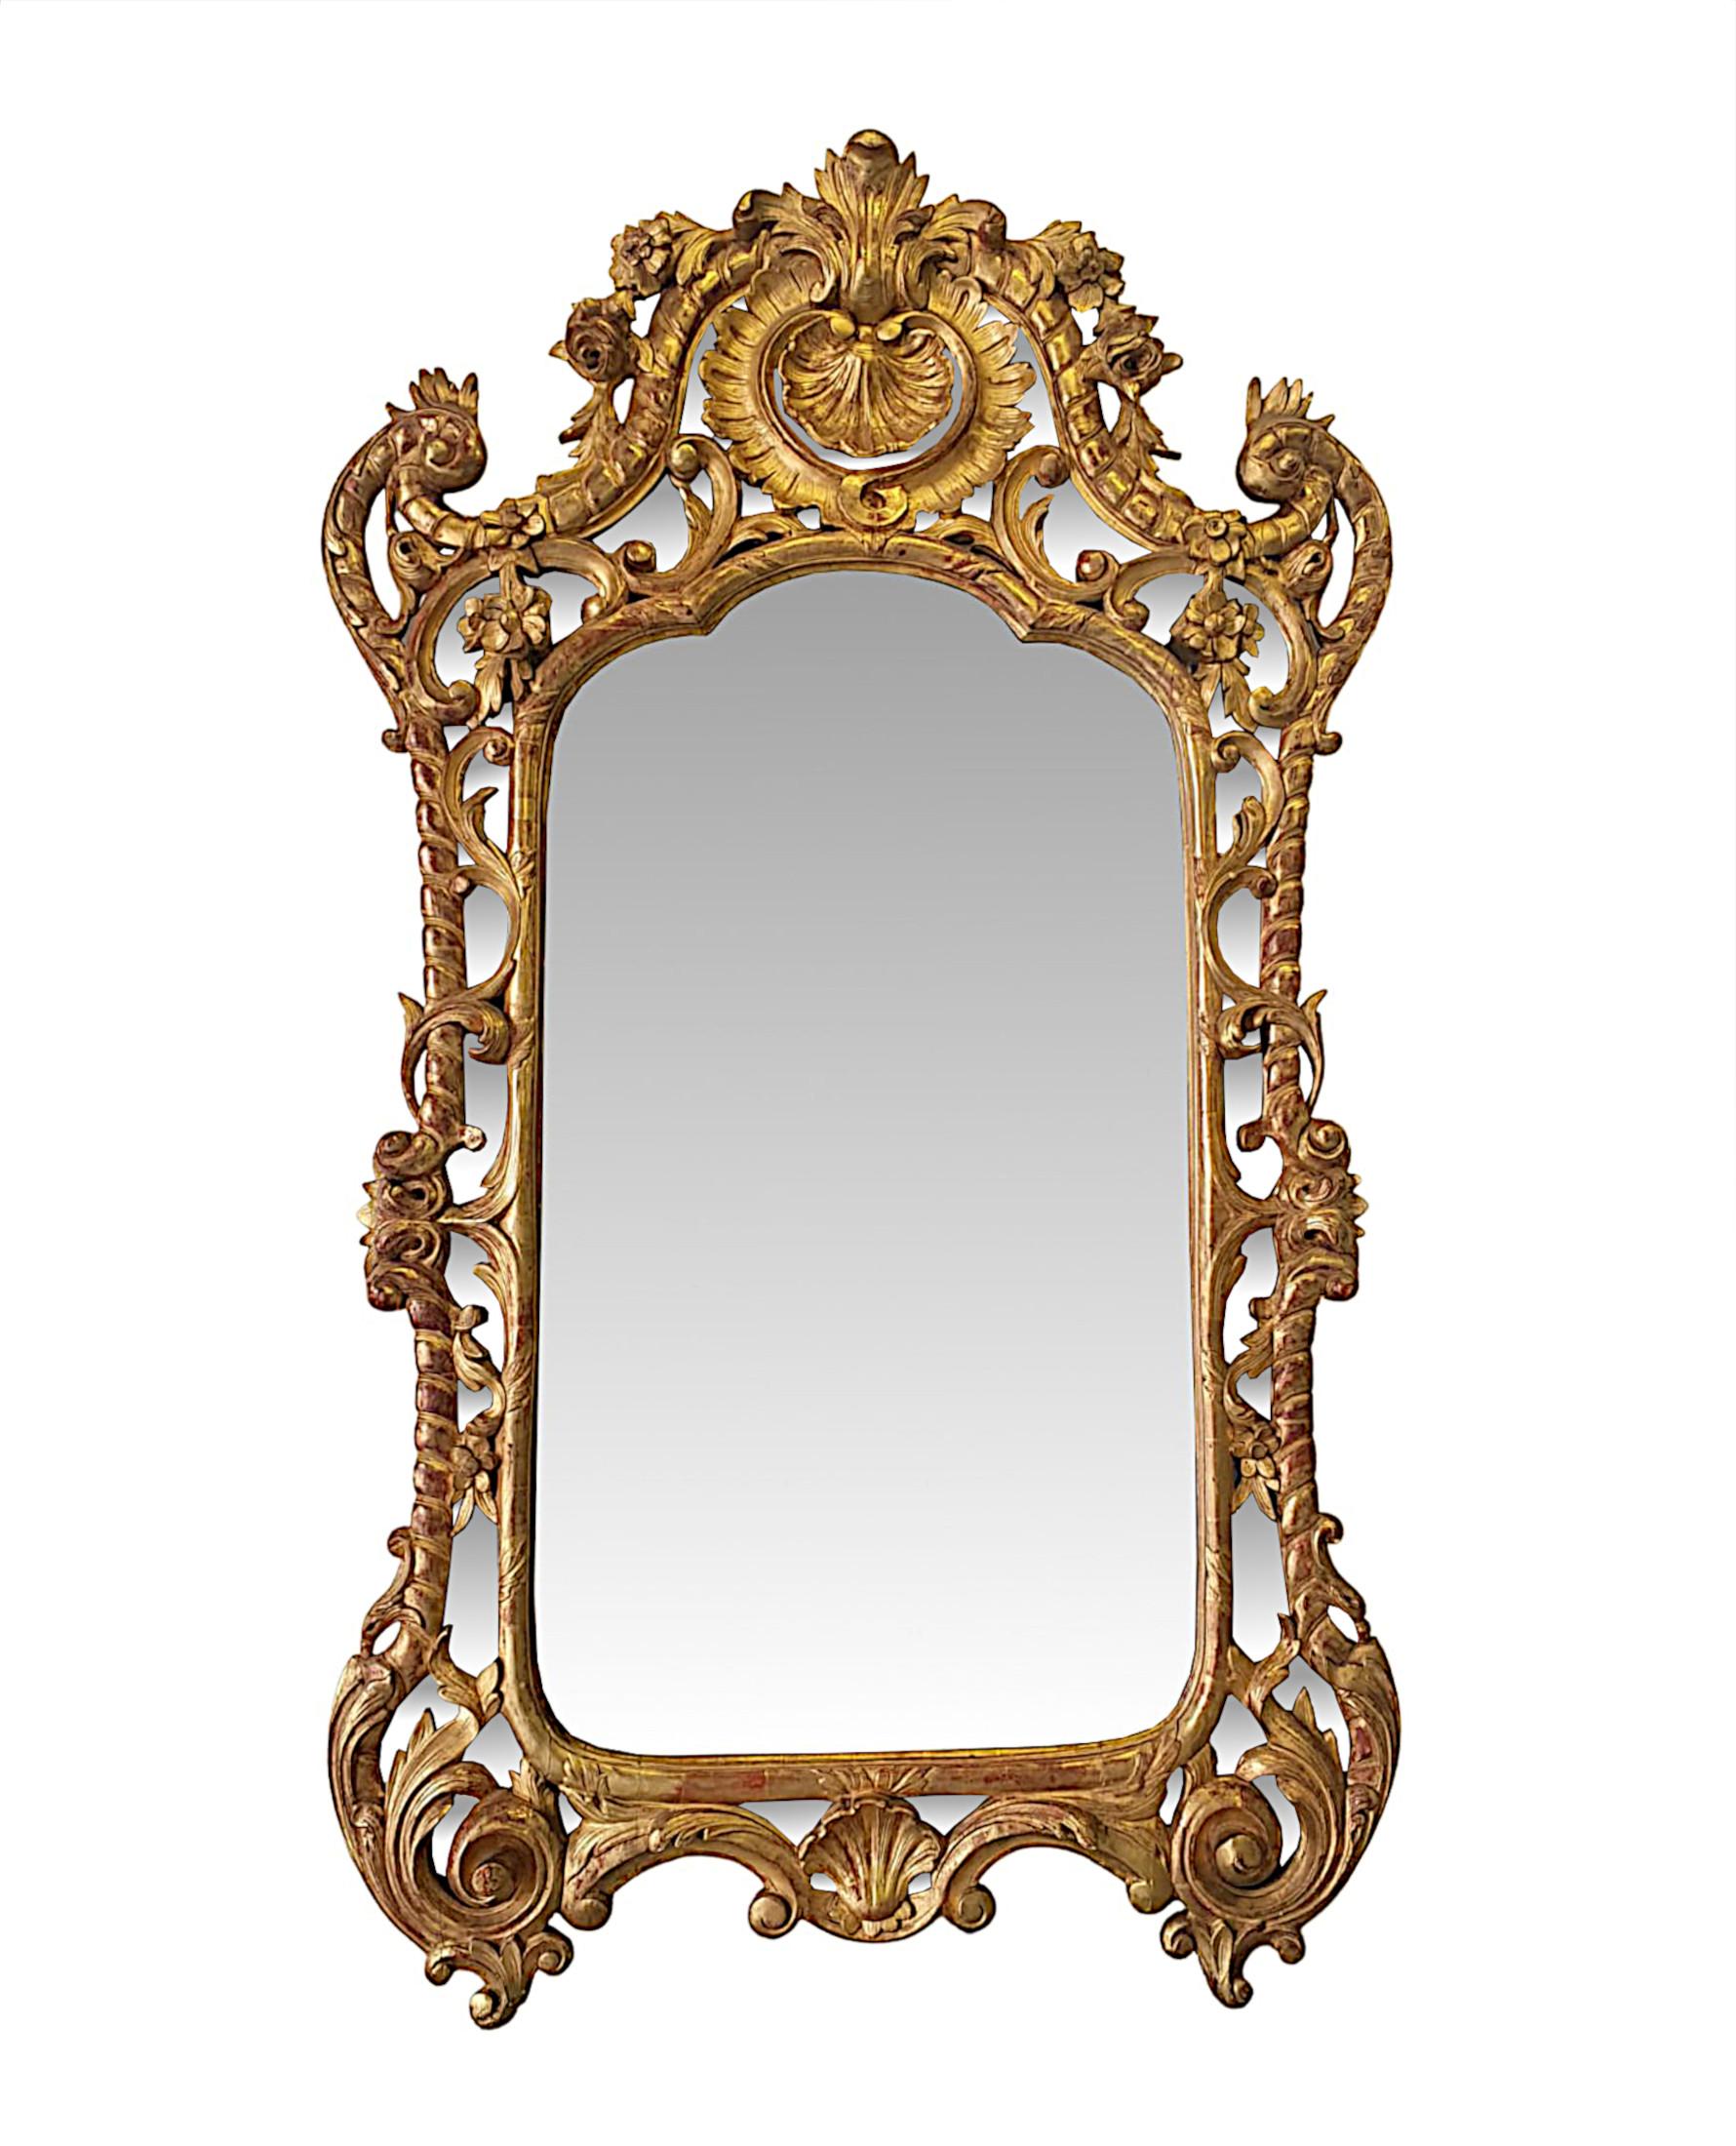 Rare and Exceptional Large Early 19th Century Giltwood Overmantle Mirror For Sale 2